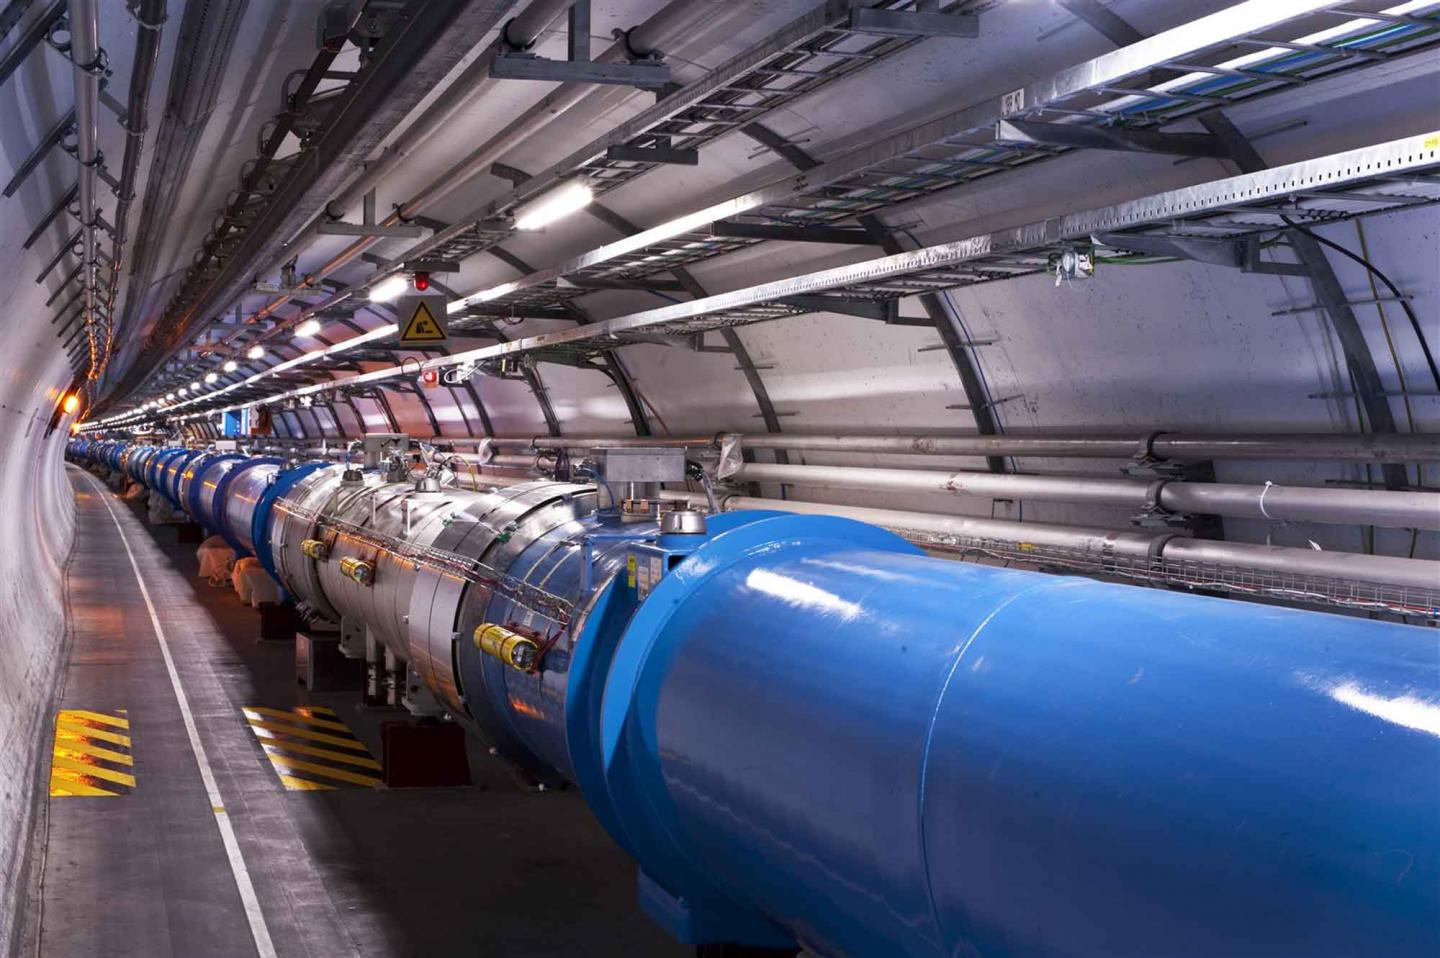 Large Hadron Collider (LHC) at CERN may detect portal if aliens have visited the earth.